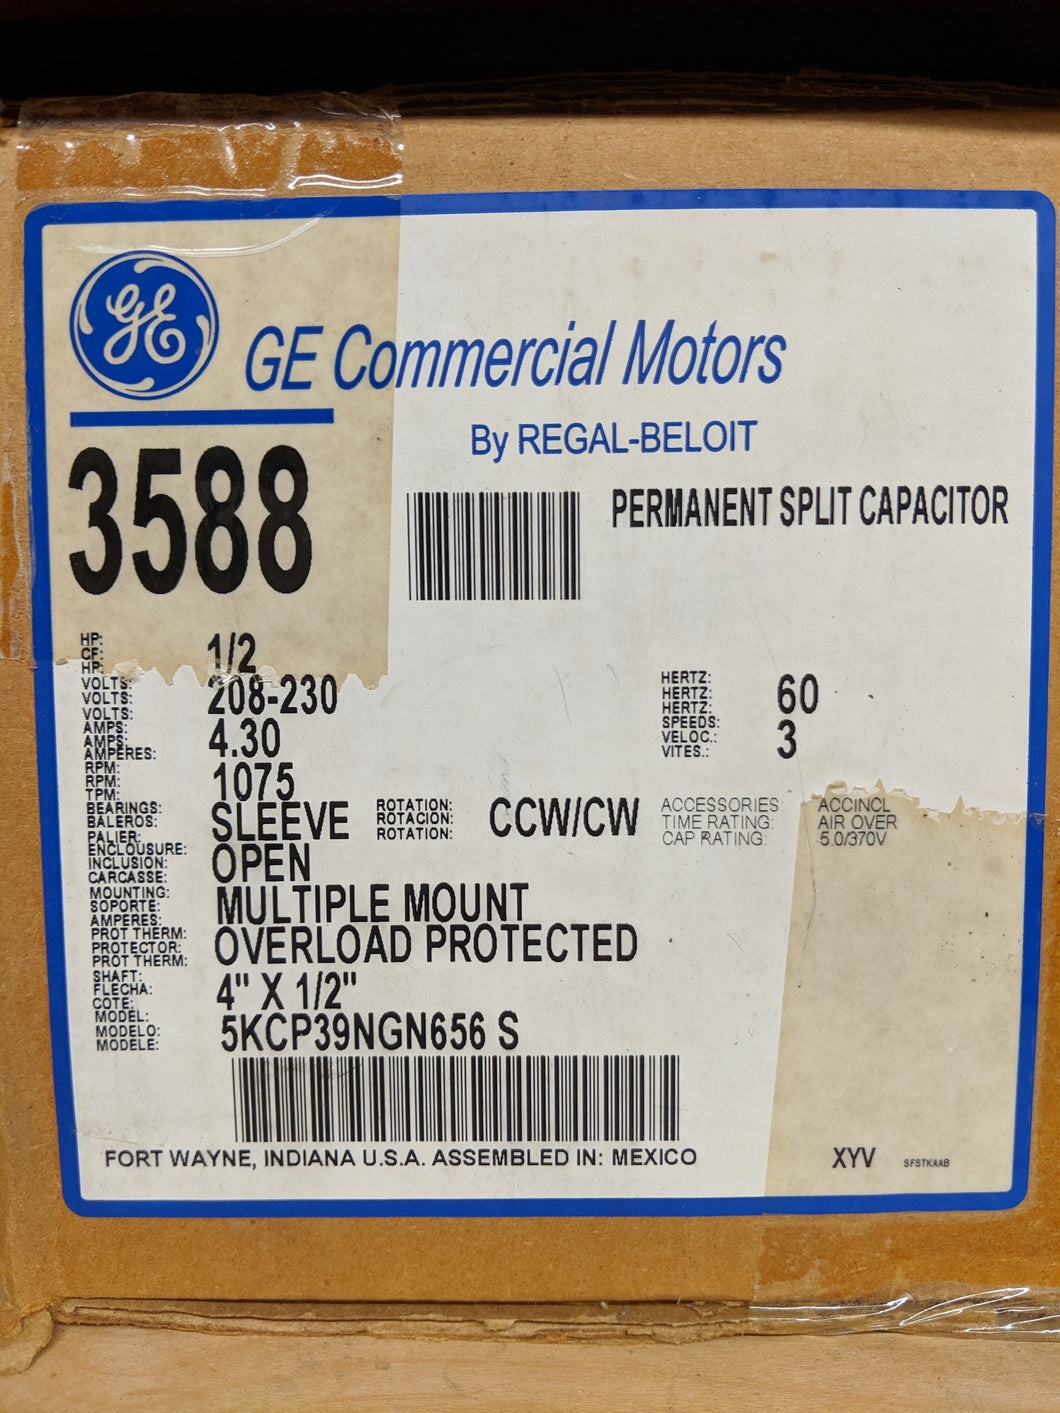 GE 3588, 1/2 HP, 208-230 Volts, 5KCP39NGN656S